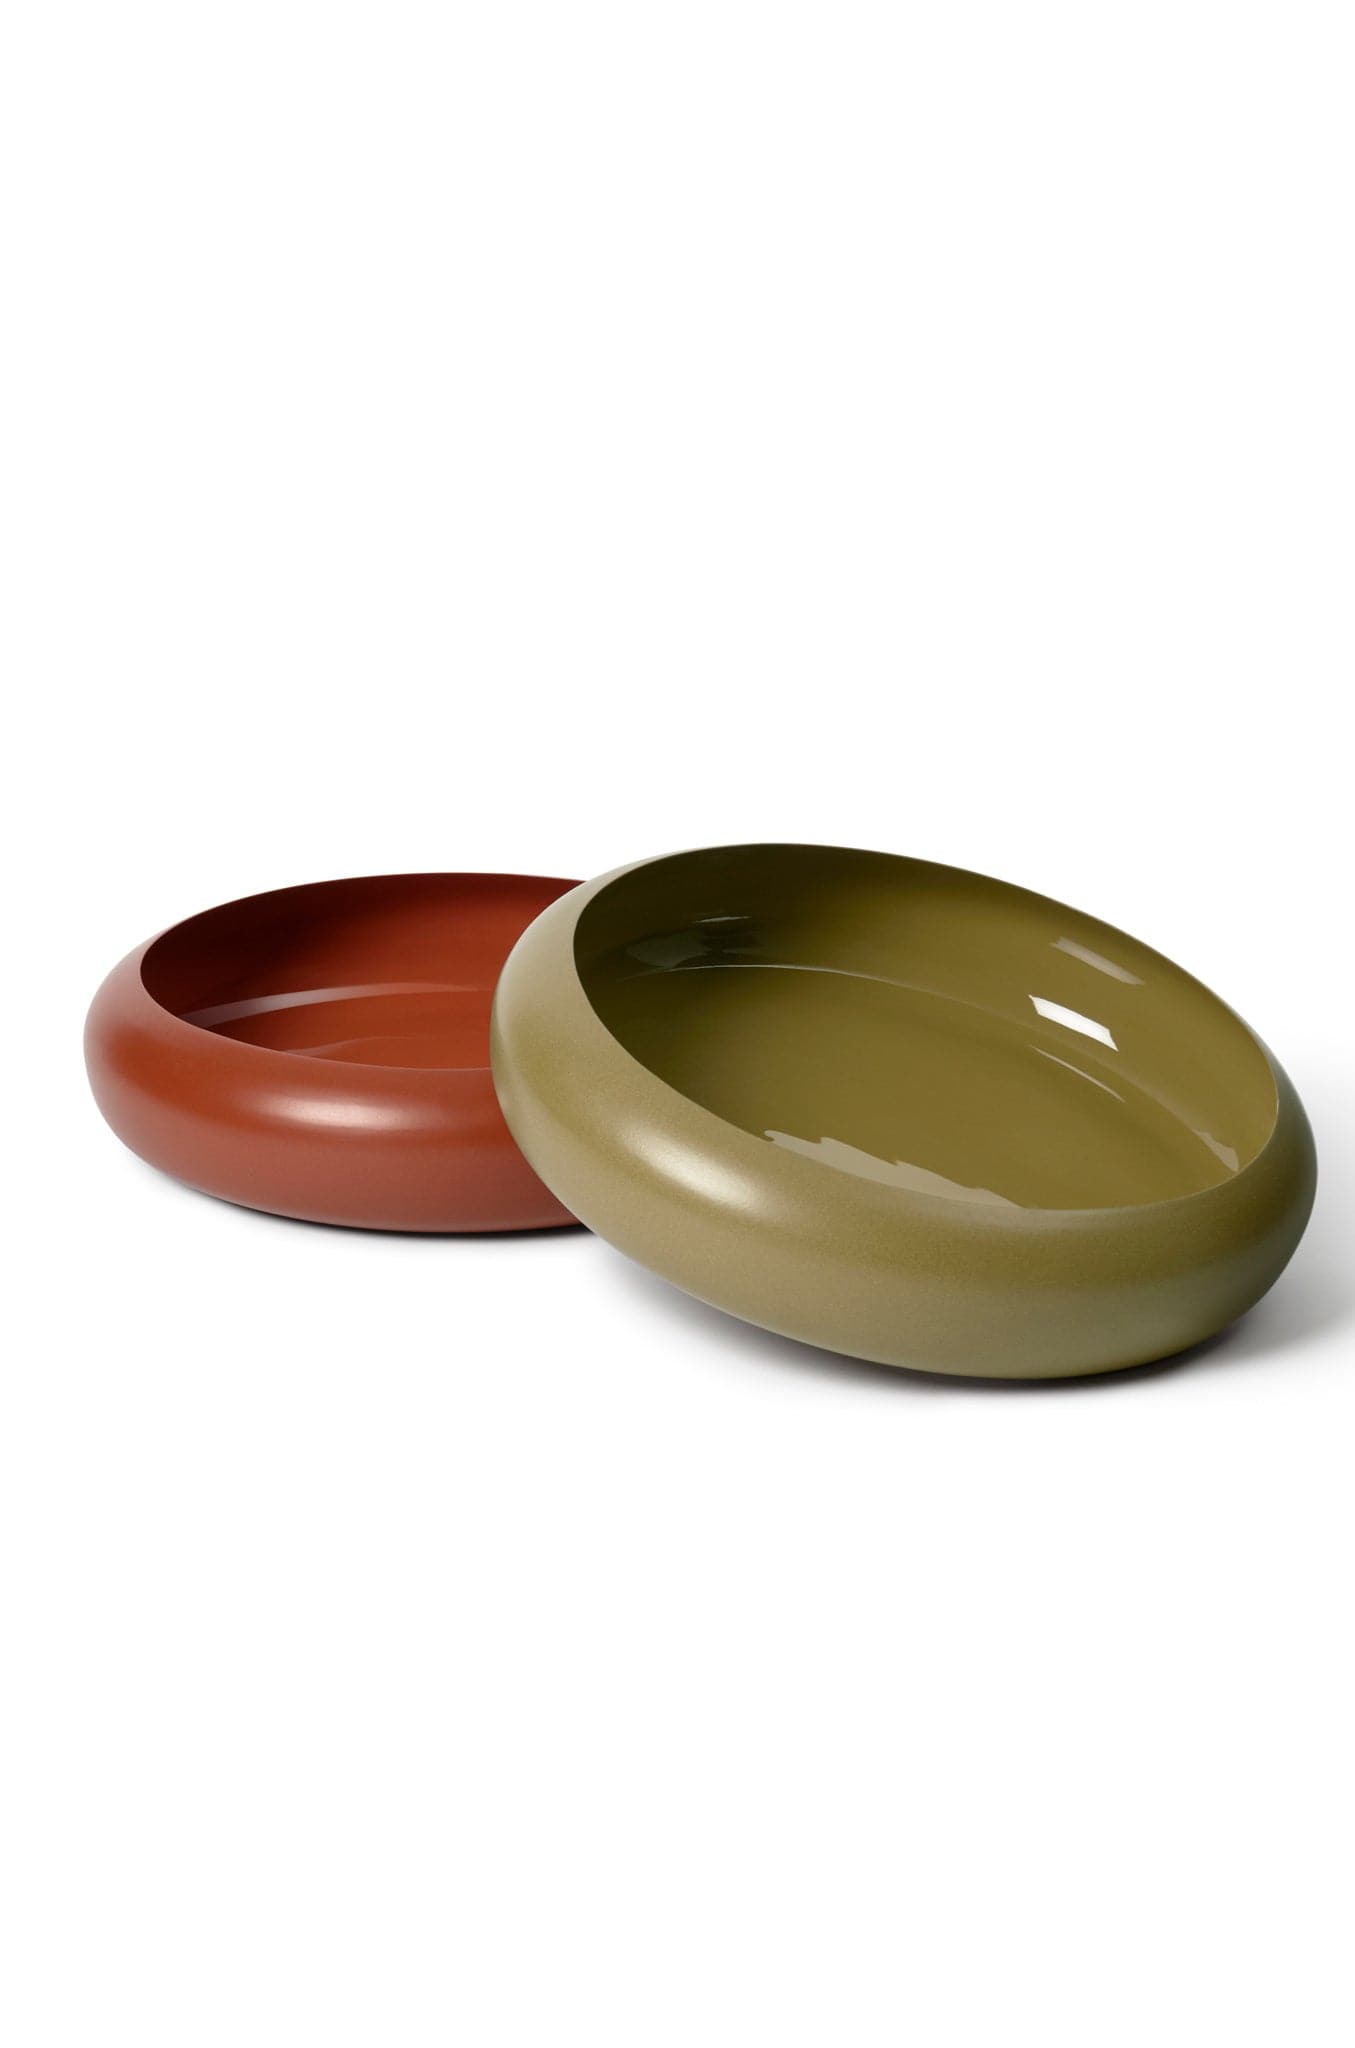 Lightly Infinity Bowl - Marz Designs AULightly